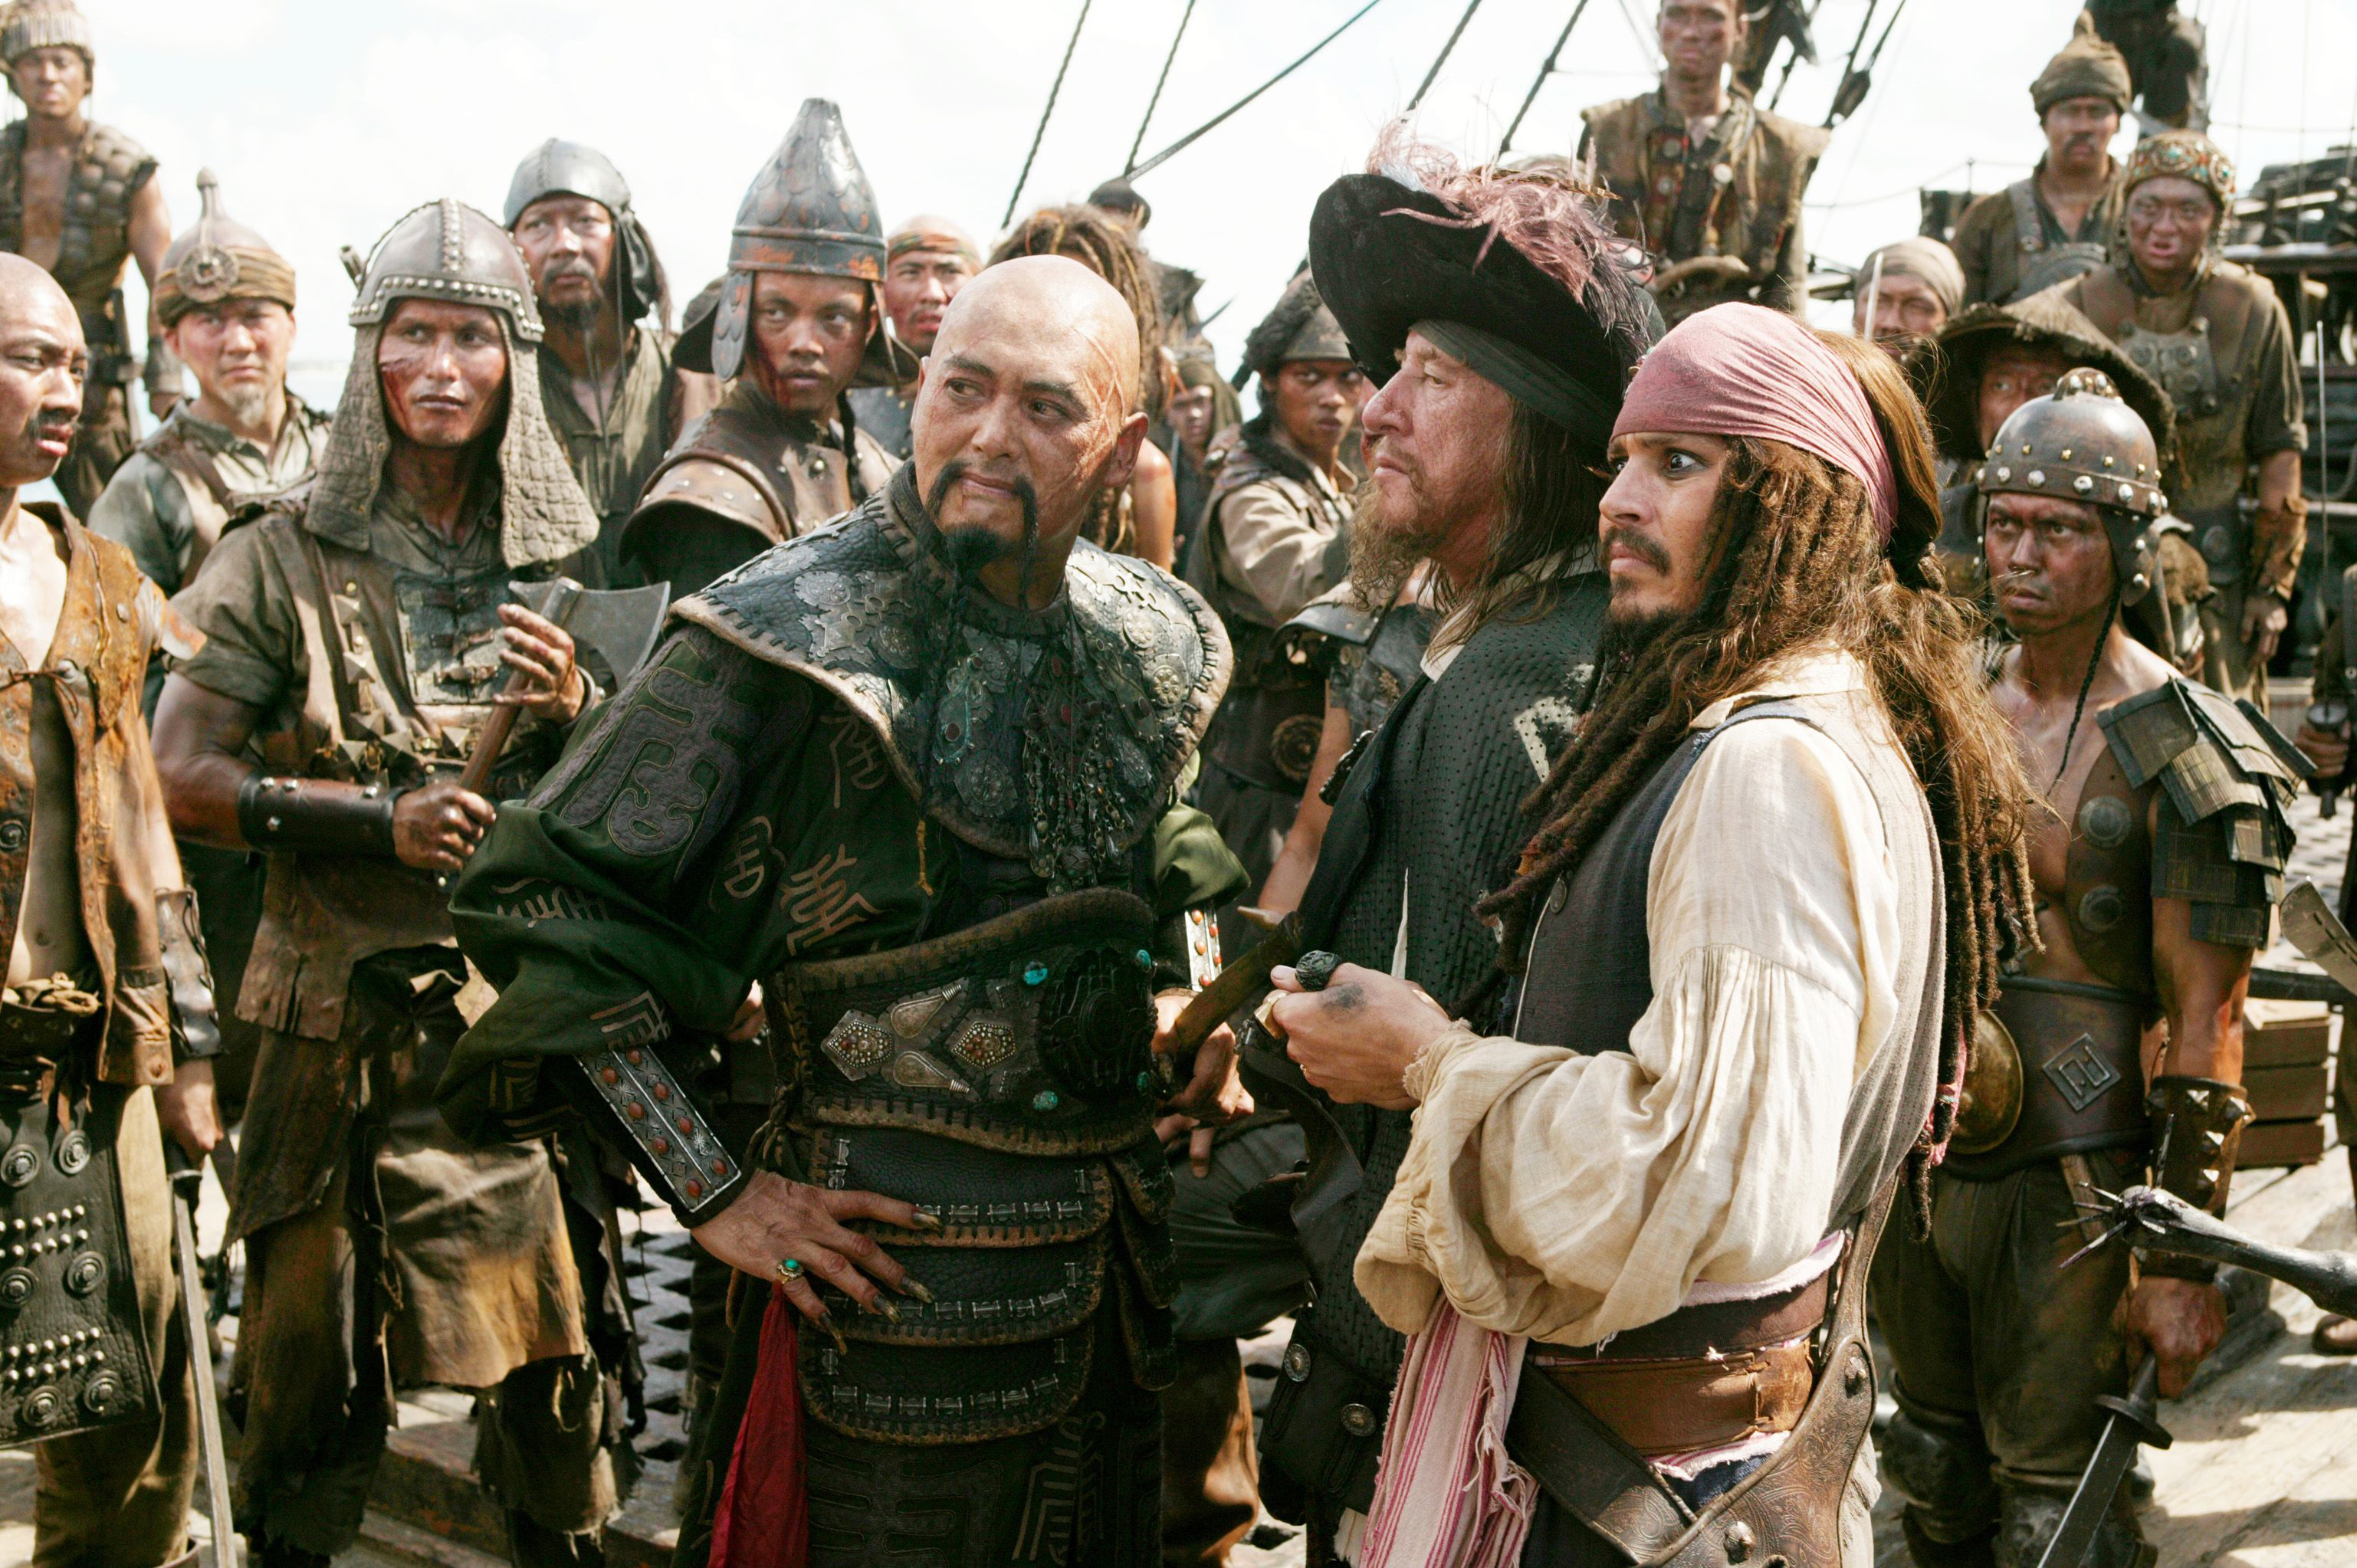 hector barbossa, movie, pirates of the caribbean: at world's end, captain sao feng, chow yun fat, geoffrey rush, jack sparrow, johnny depp, pirates of the caribbean for android